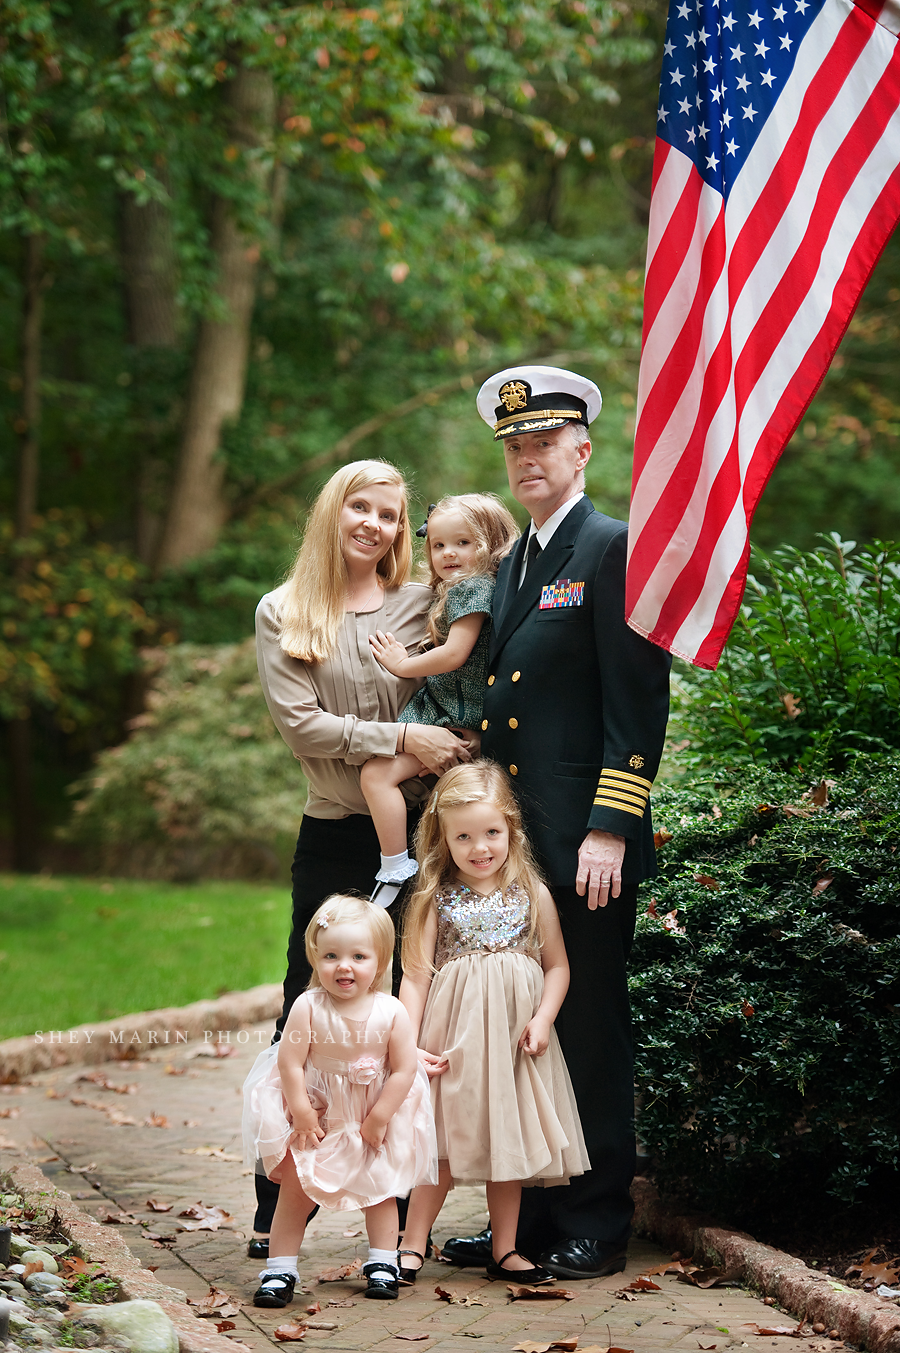 family in front of American flag with soldier father in uniform